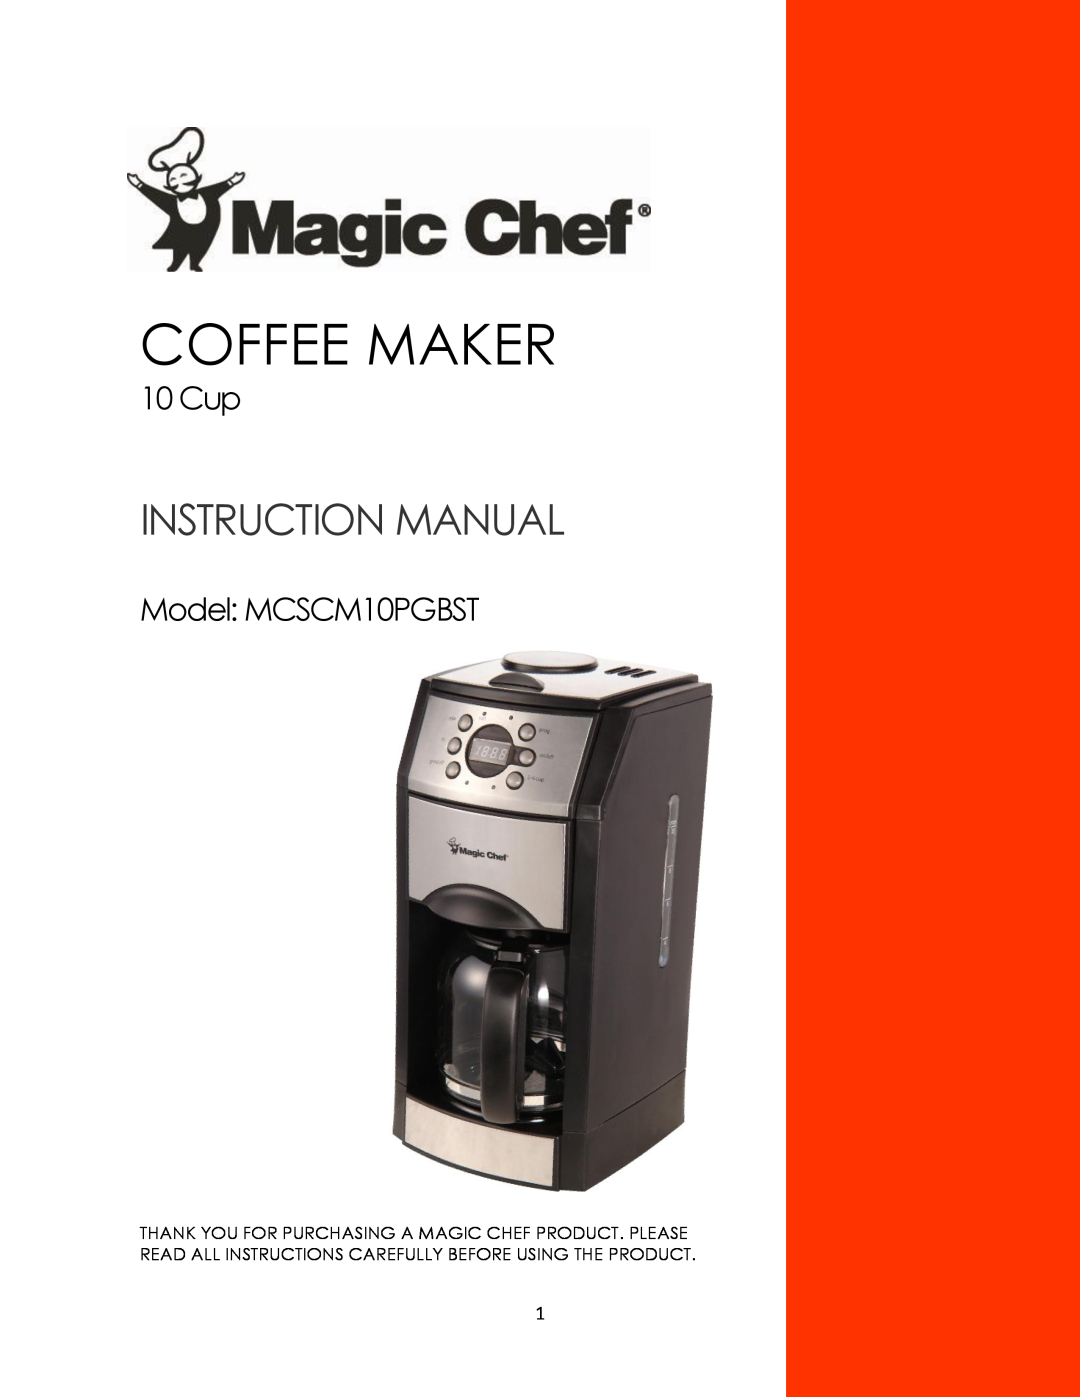 Magic Chef instruction manual Coffee Maker, 10 Cup, Model MCSCM10PGBST 